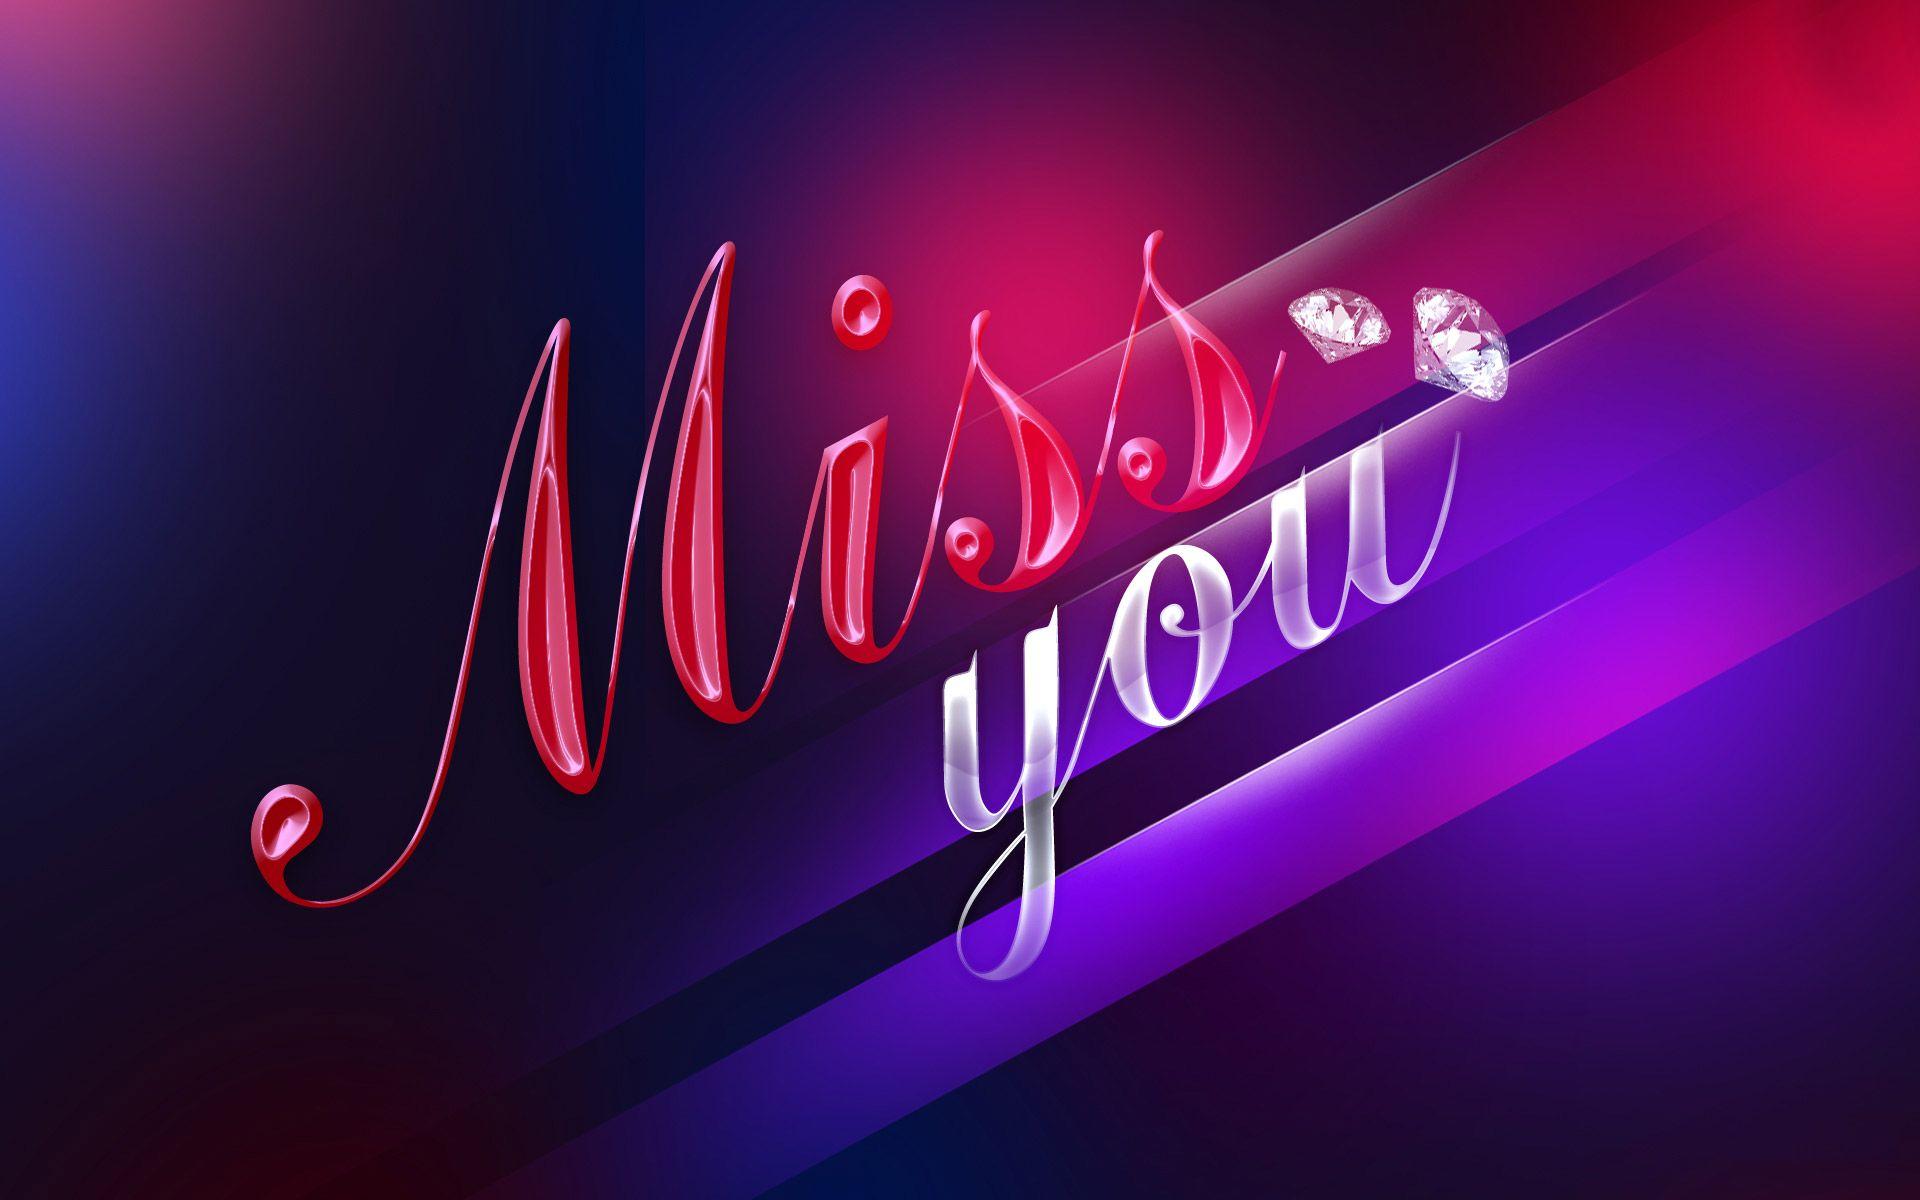 Awesome I Miss You Wallpaper HD For PC Computer HD Wallpaper. miss